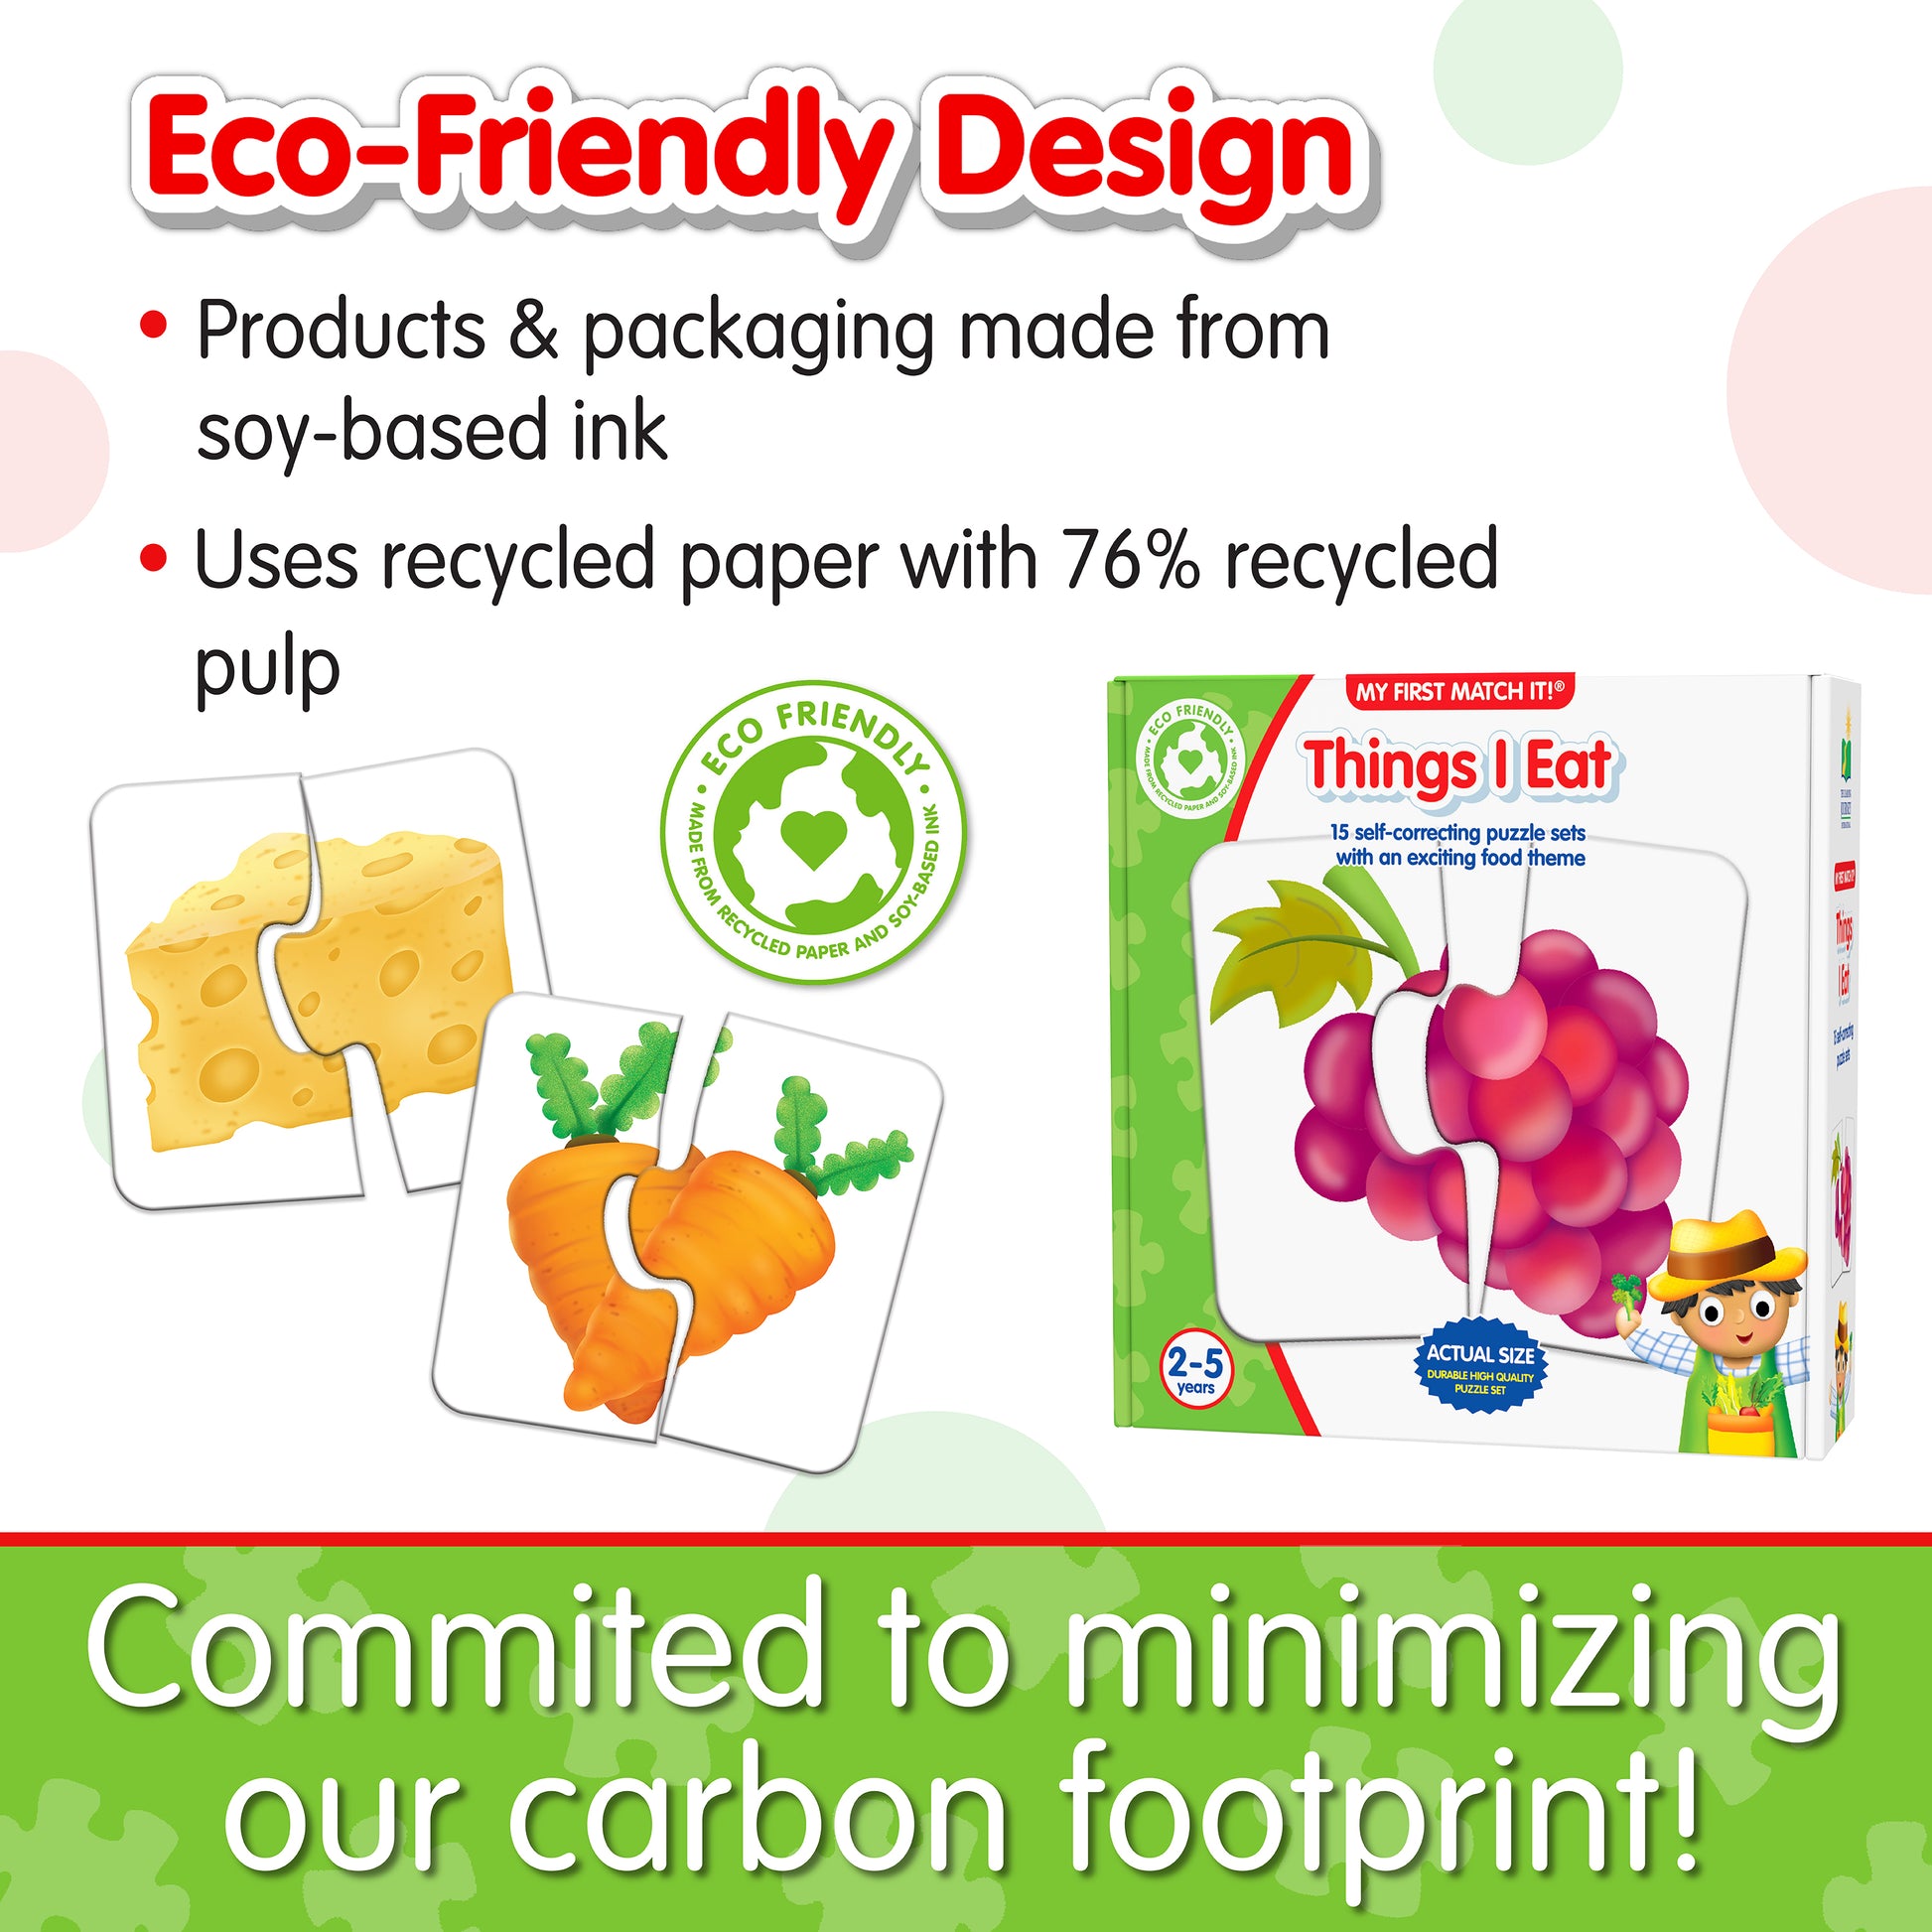 Infographic about My First Match It - Things I Eat's eco-friendly design that says, "Committed to minimizing our carbon footprint!"